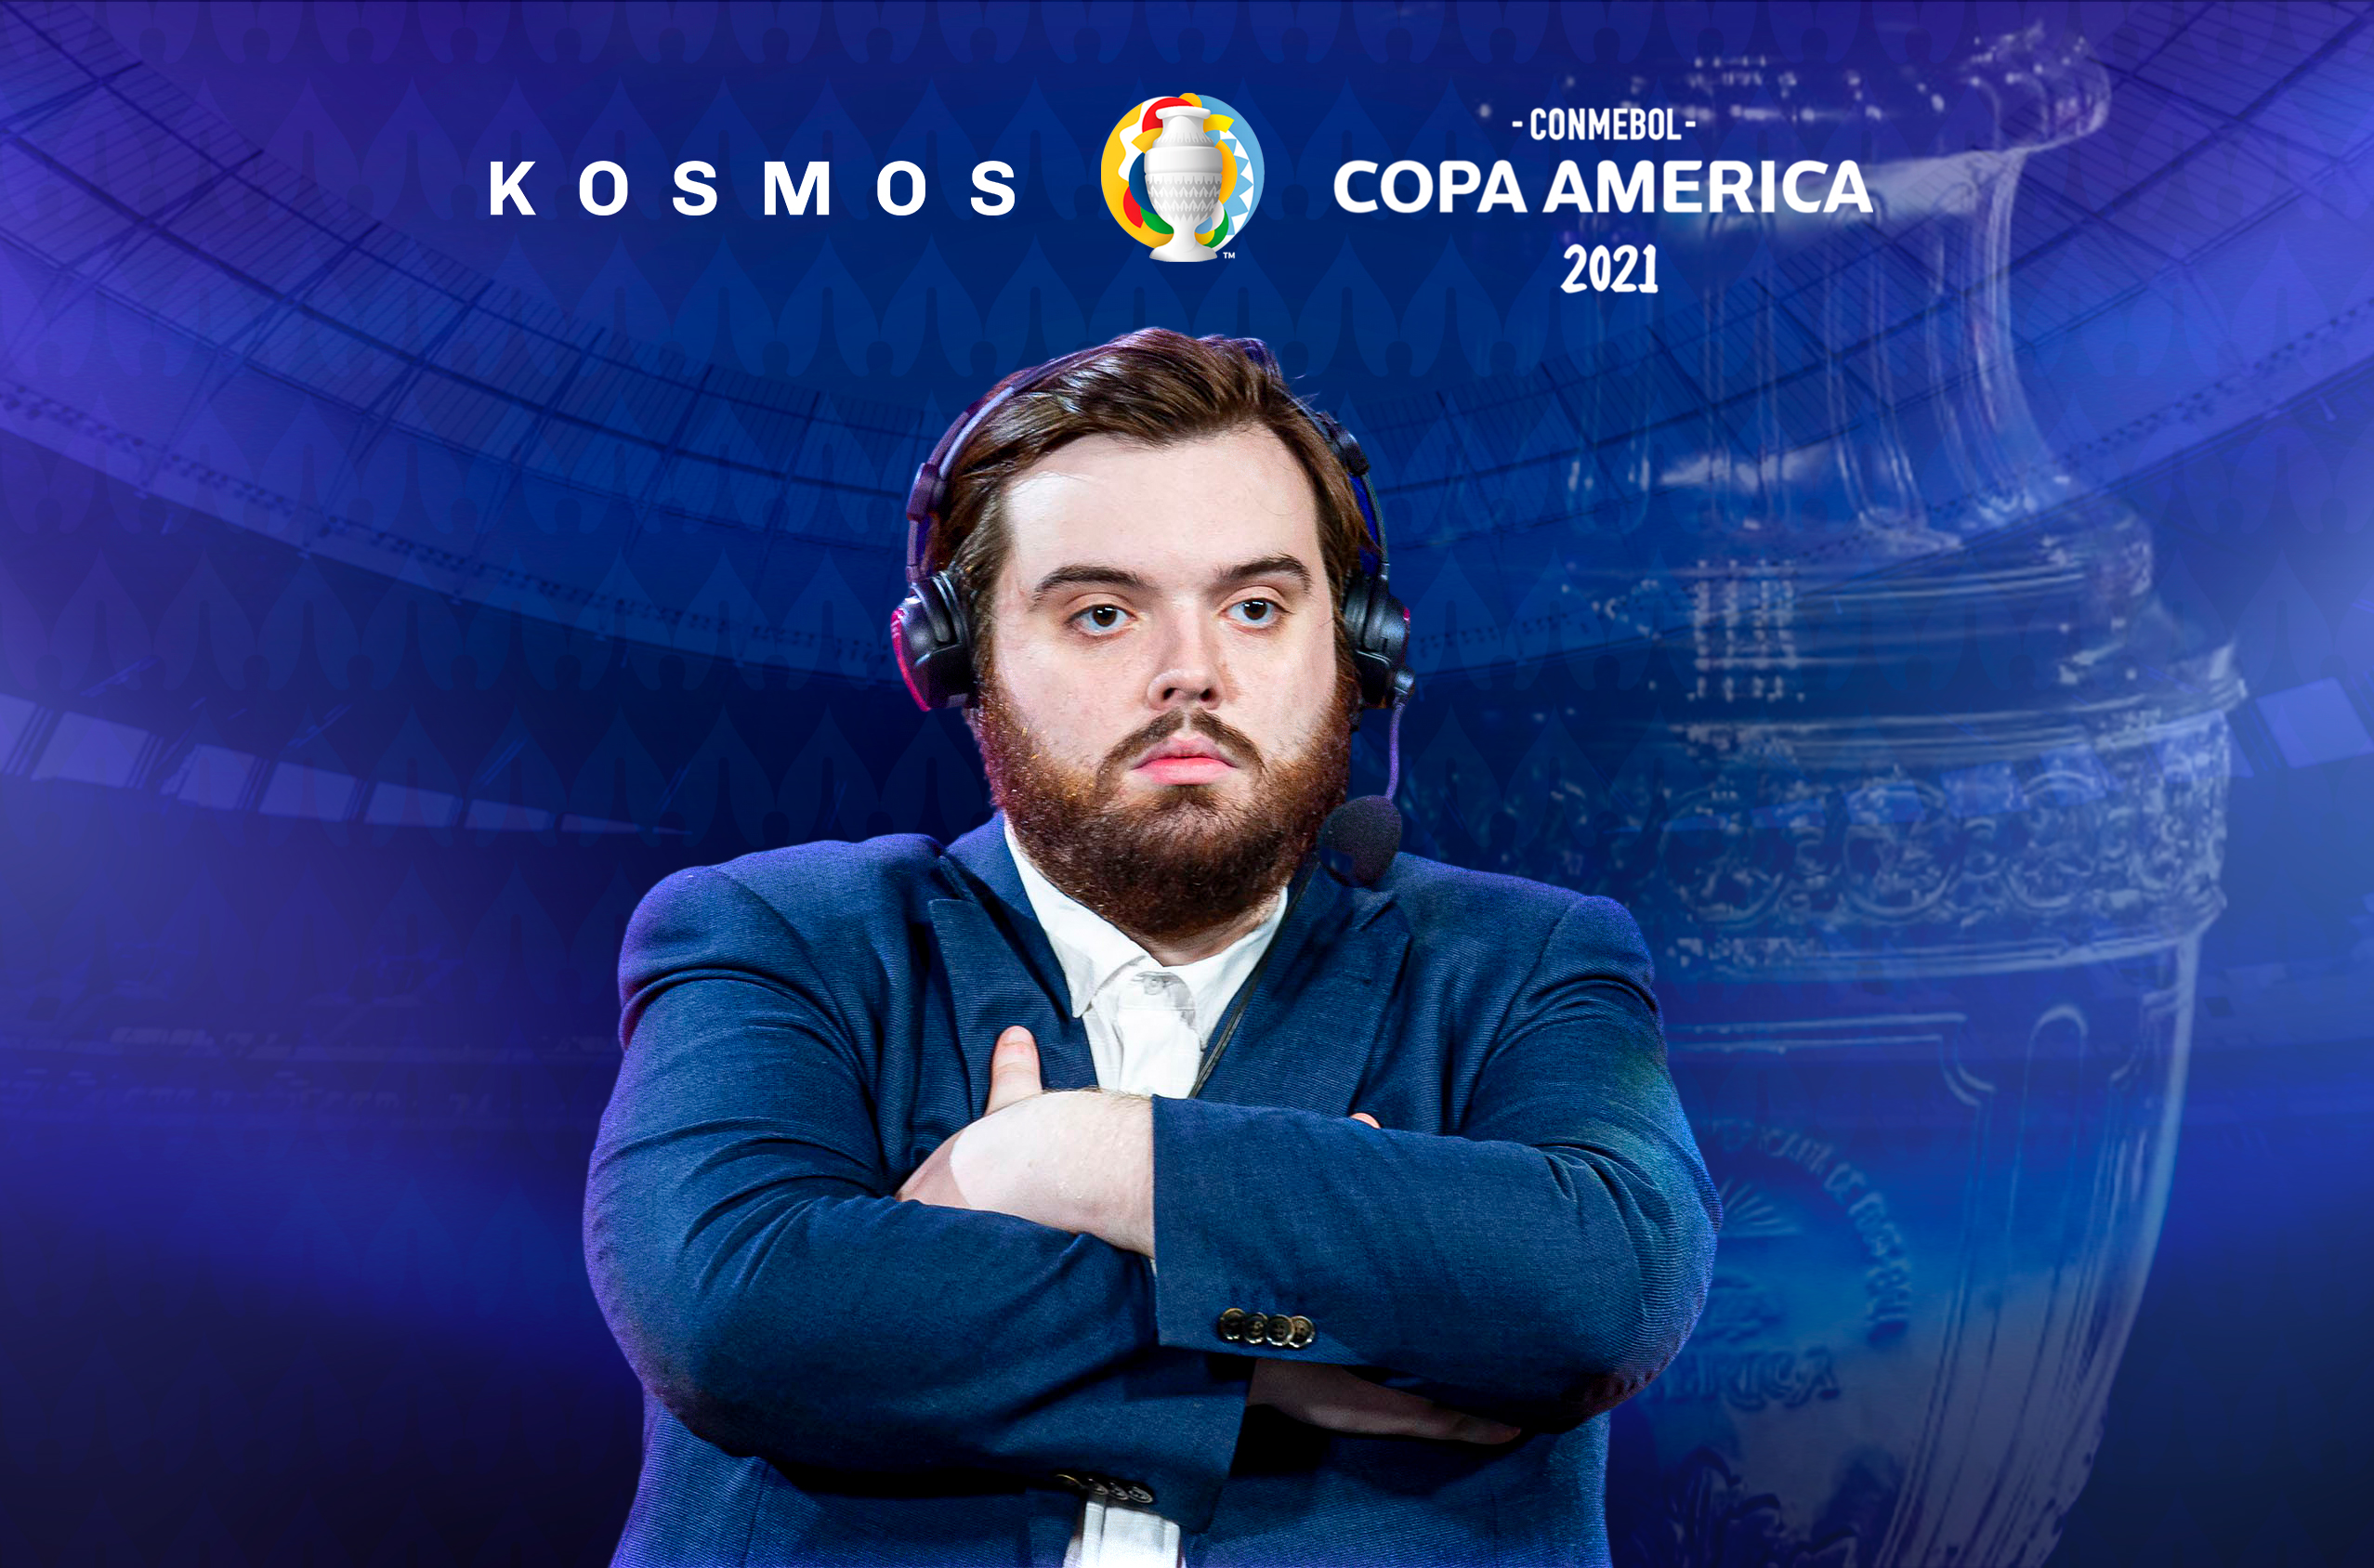 Ibai Llanos and Kosmos team up to broadcast the Copa América on Twitch